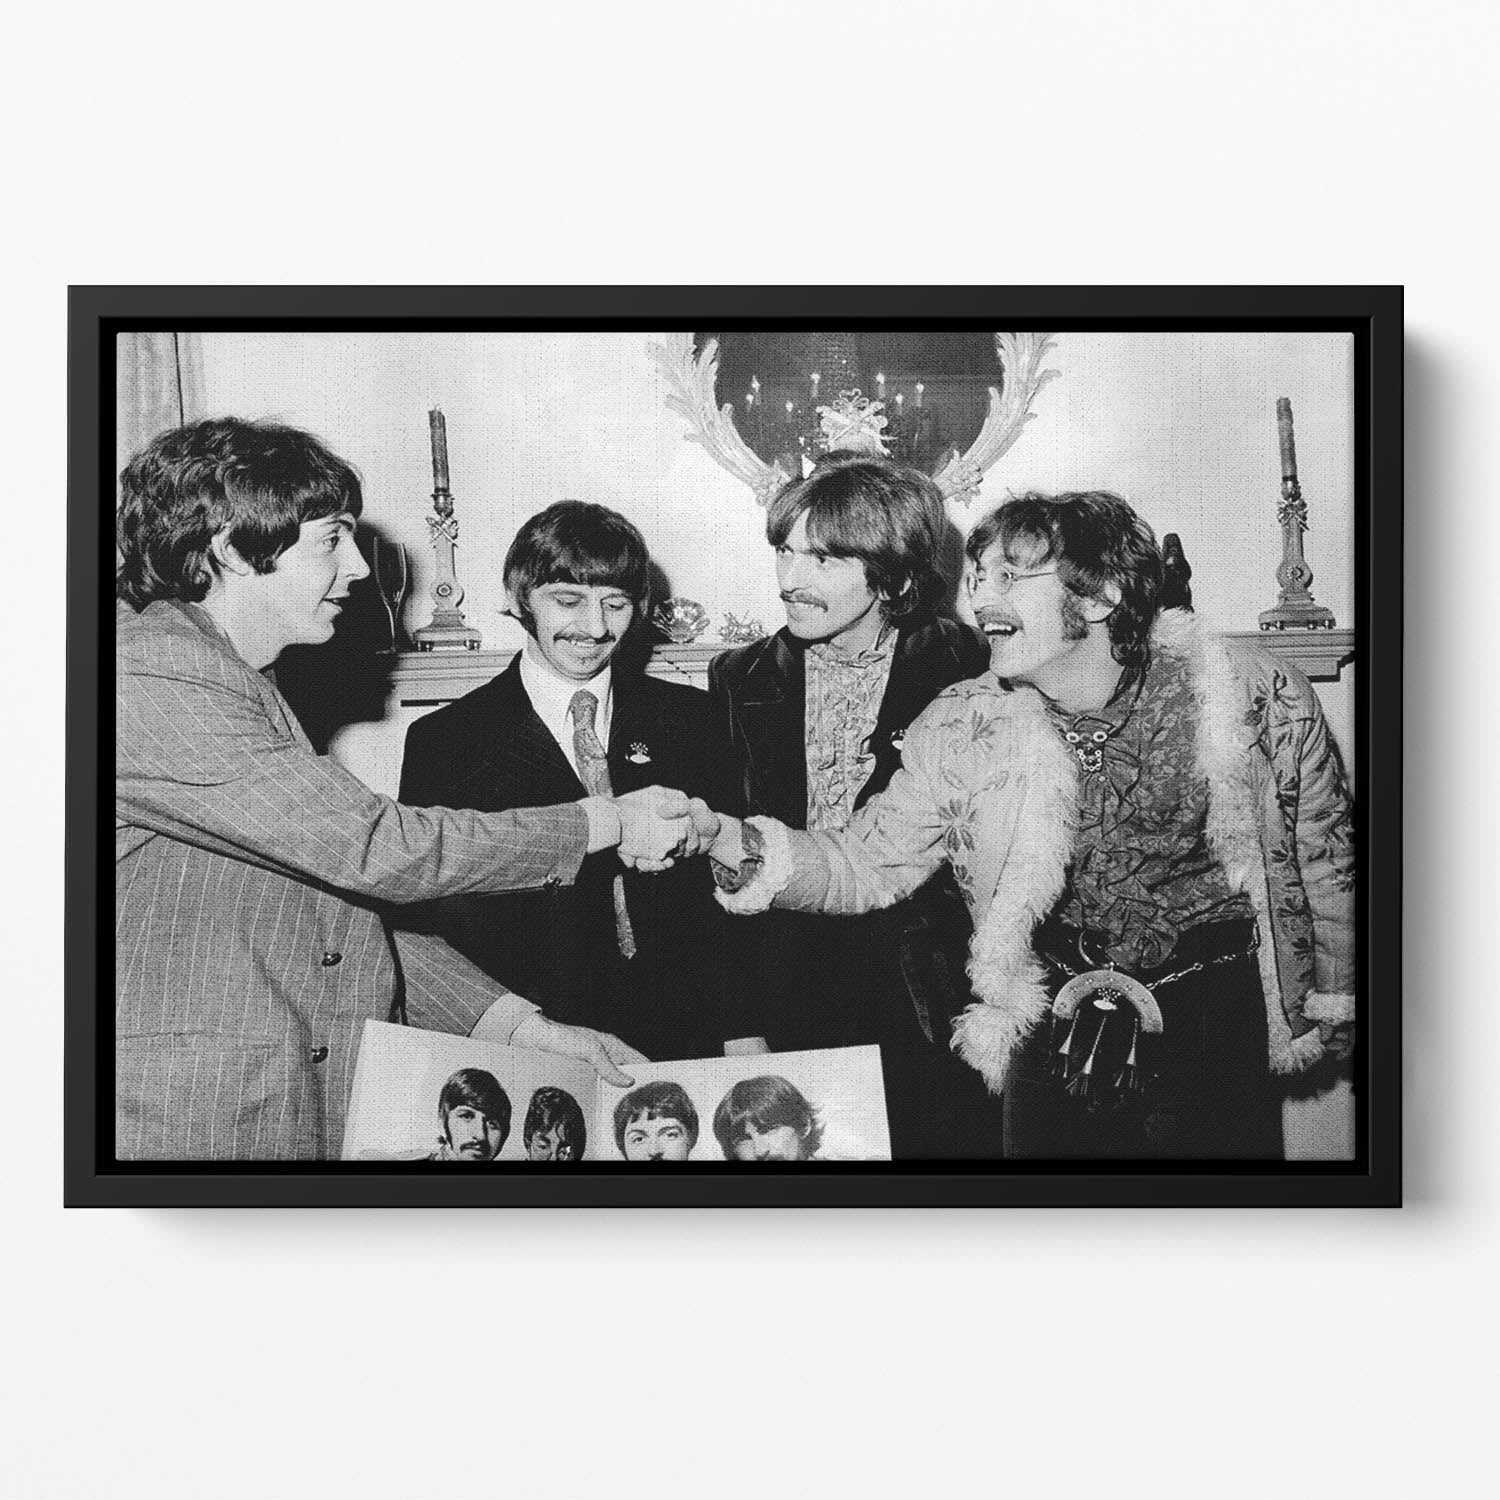 The Beatles shaking hands in 1967 Floating Framed Canvas